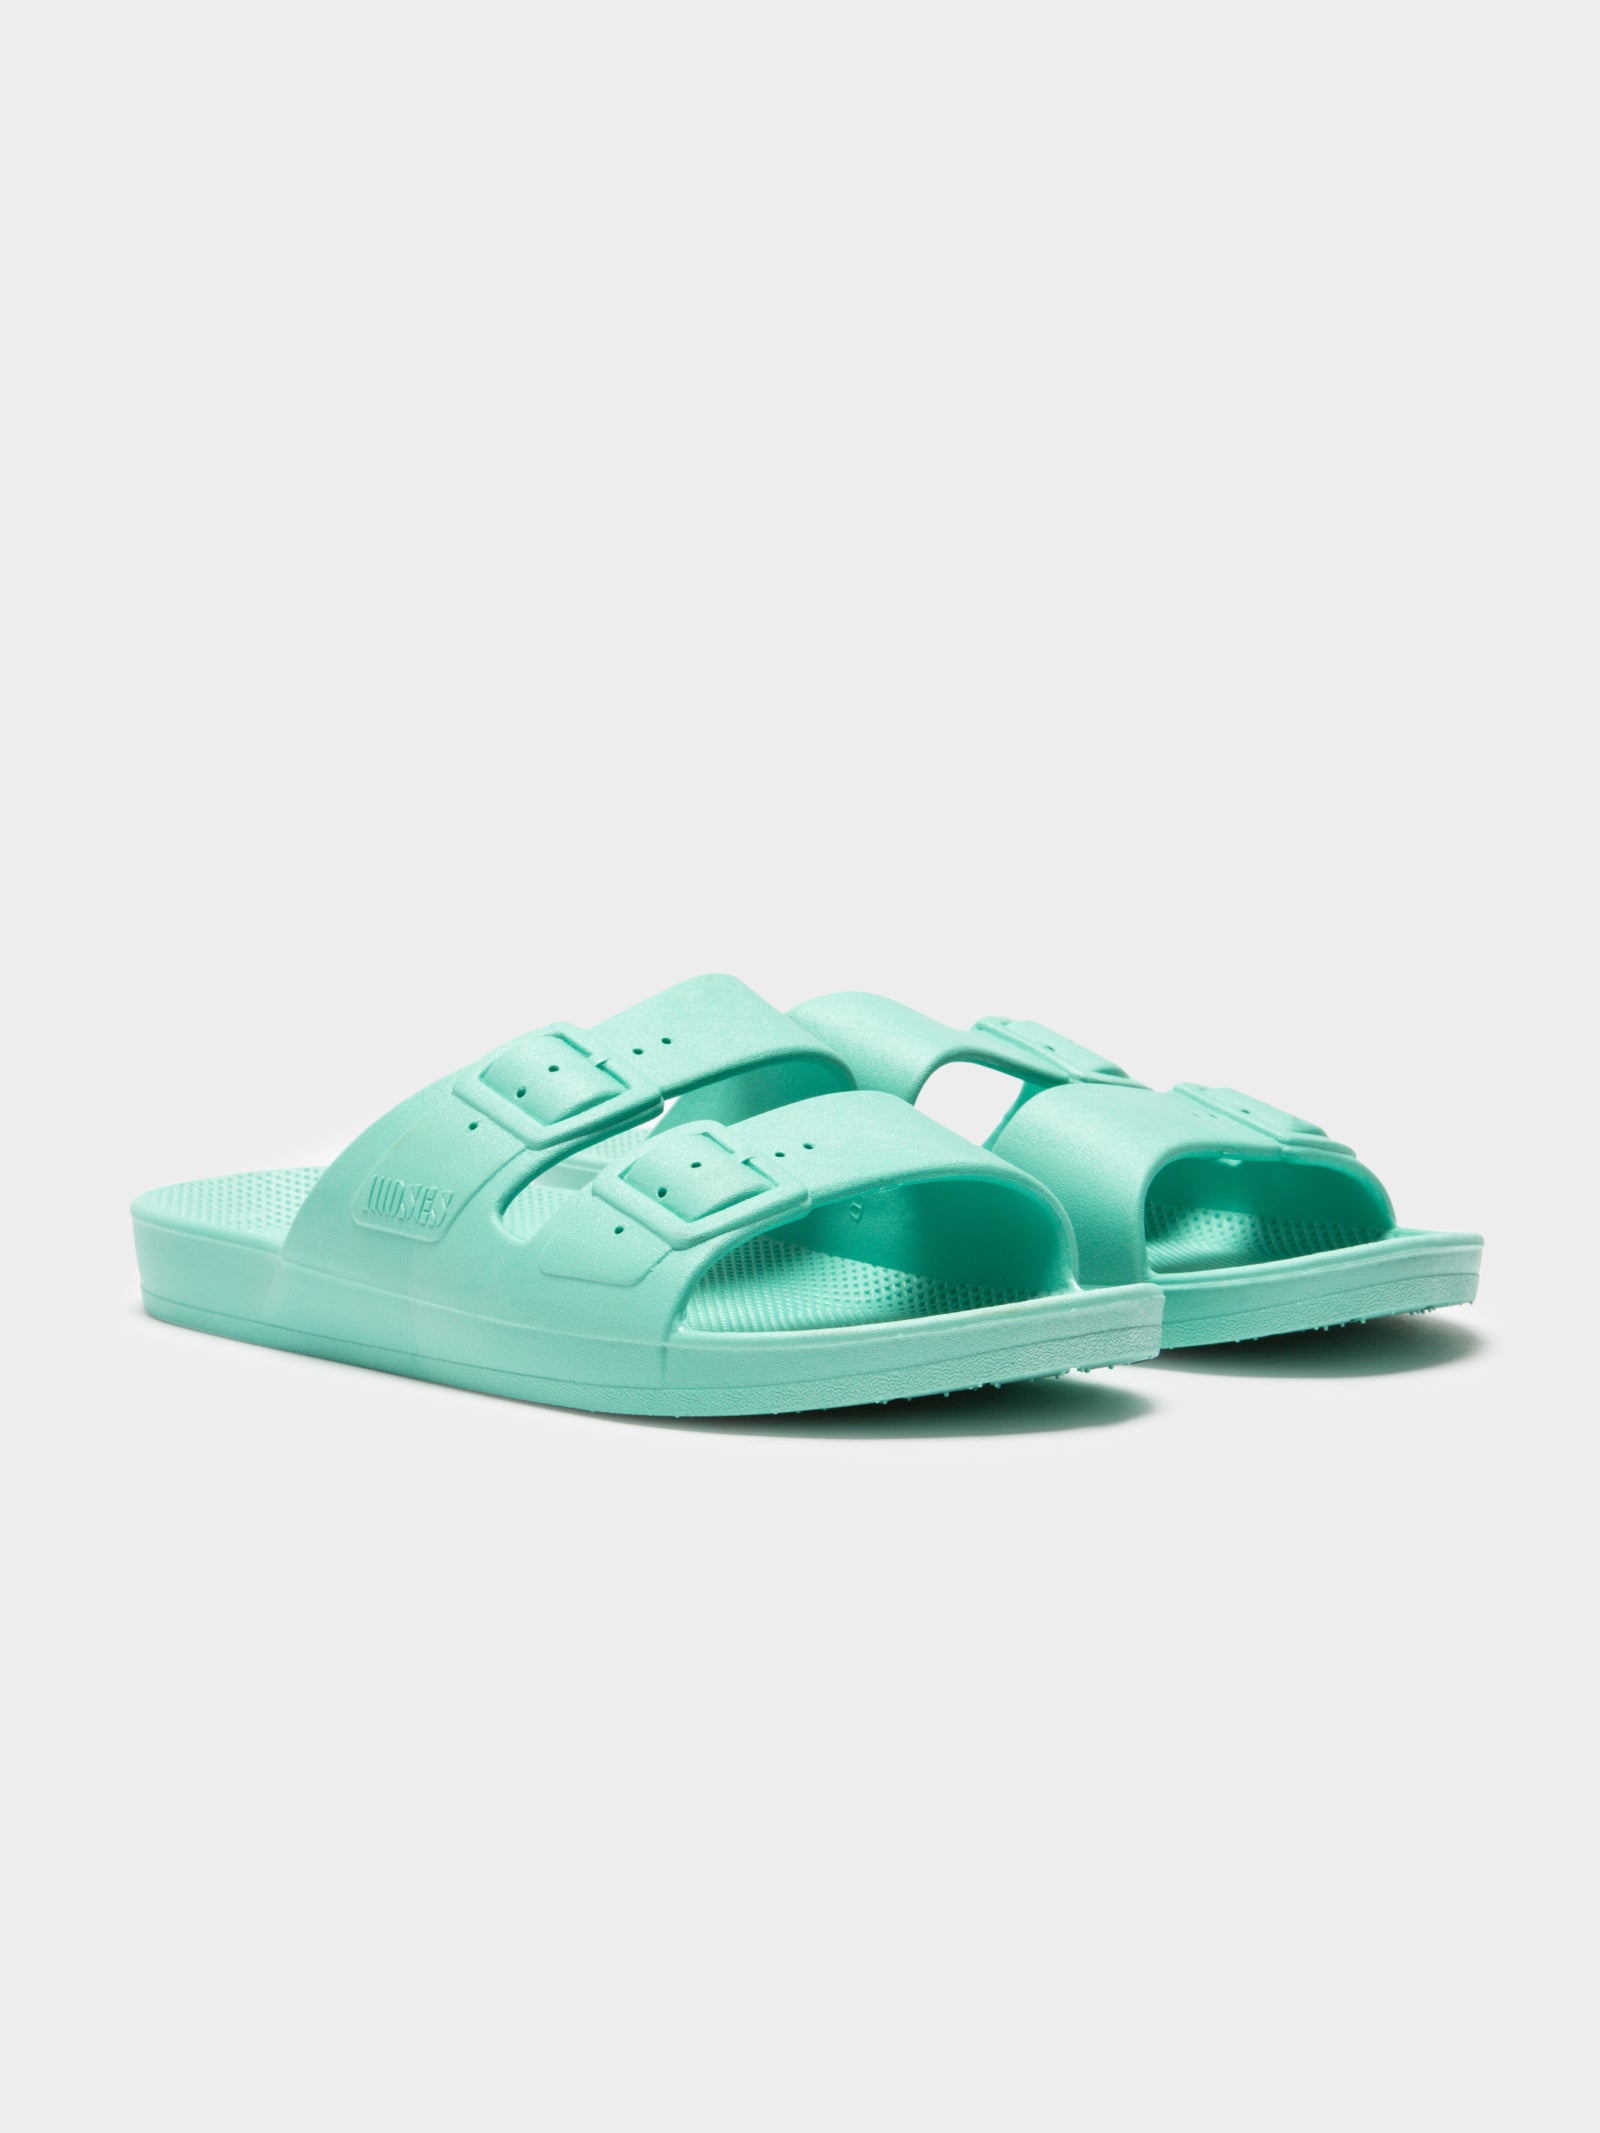 Unisex Freedom Moses Slides in Miami Teal - Glue Store